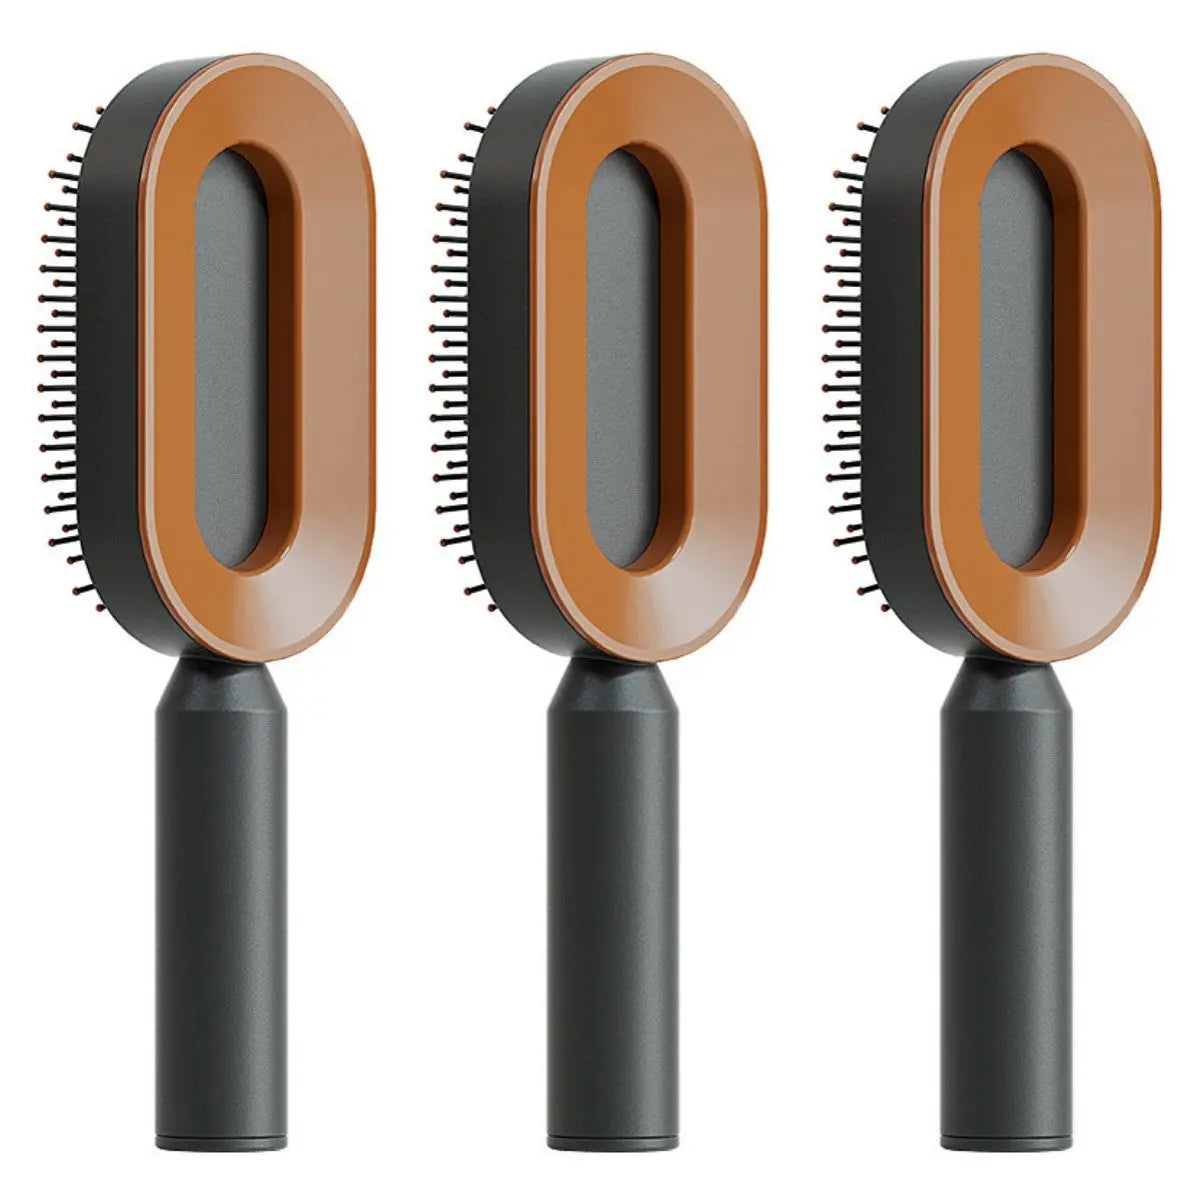 Self Cleaning Hair Brush For Women One-key Cleaning Hair Loss Airbag Massage Scalp Comb Anti-Static Hairbrush - Trending's Arena Beauty Self Cleaning Hair Brush For Women One-key Cleaning Hair Loss Airbag Massage Scalp Comb Anti-Static Hairbrush FACE Set-Q